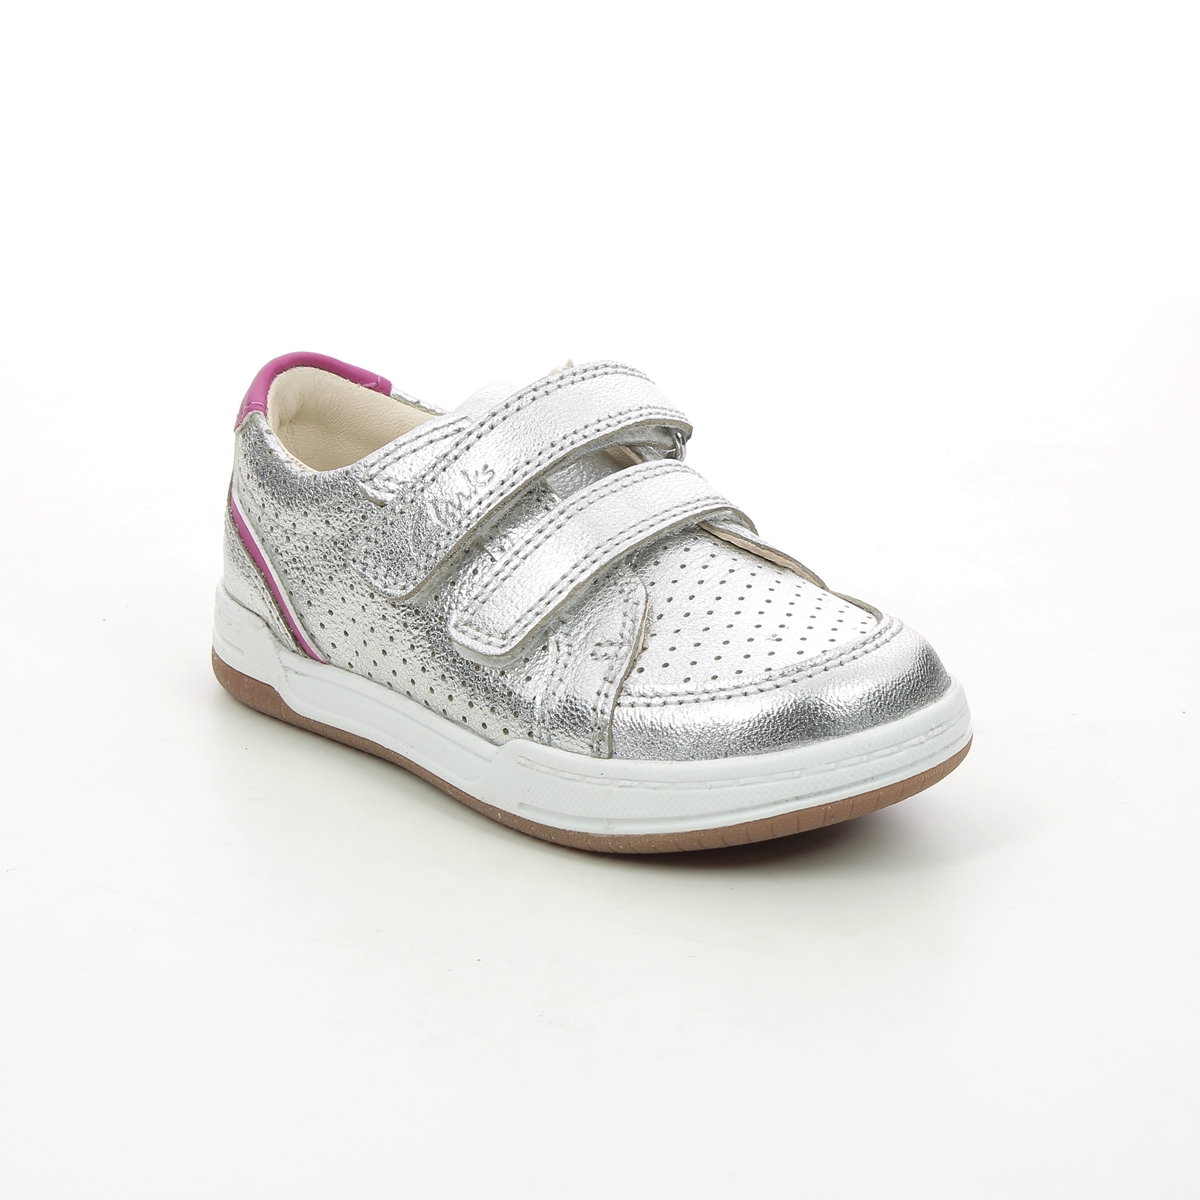 Clarks Fawn Solo T Silver Kids First And Toddler 624606F In Size 7 In Plain Silver F Width Fitting Regular Fit For kids